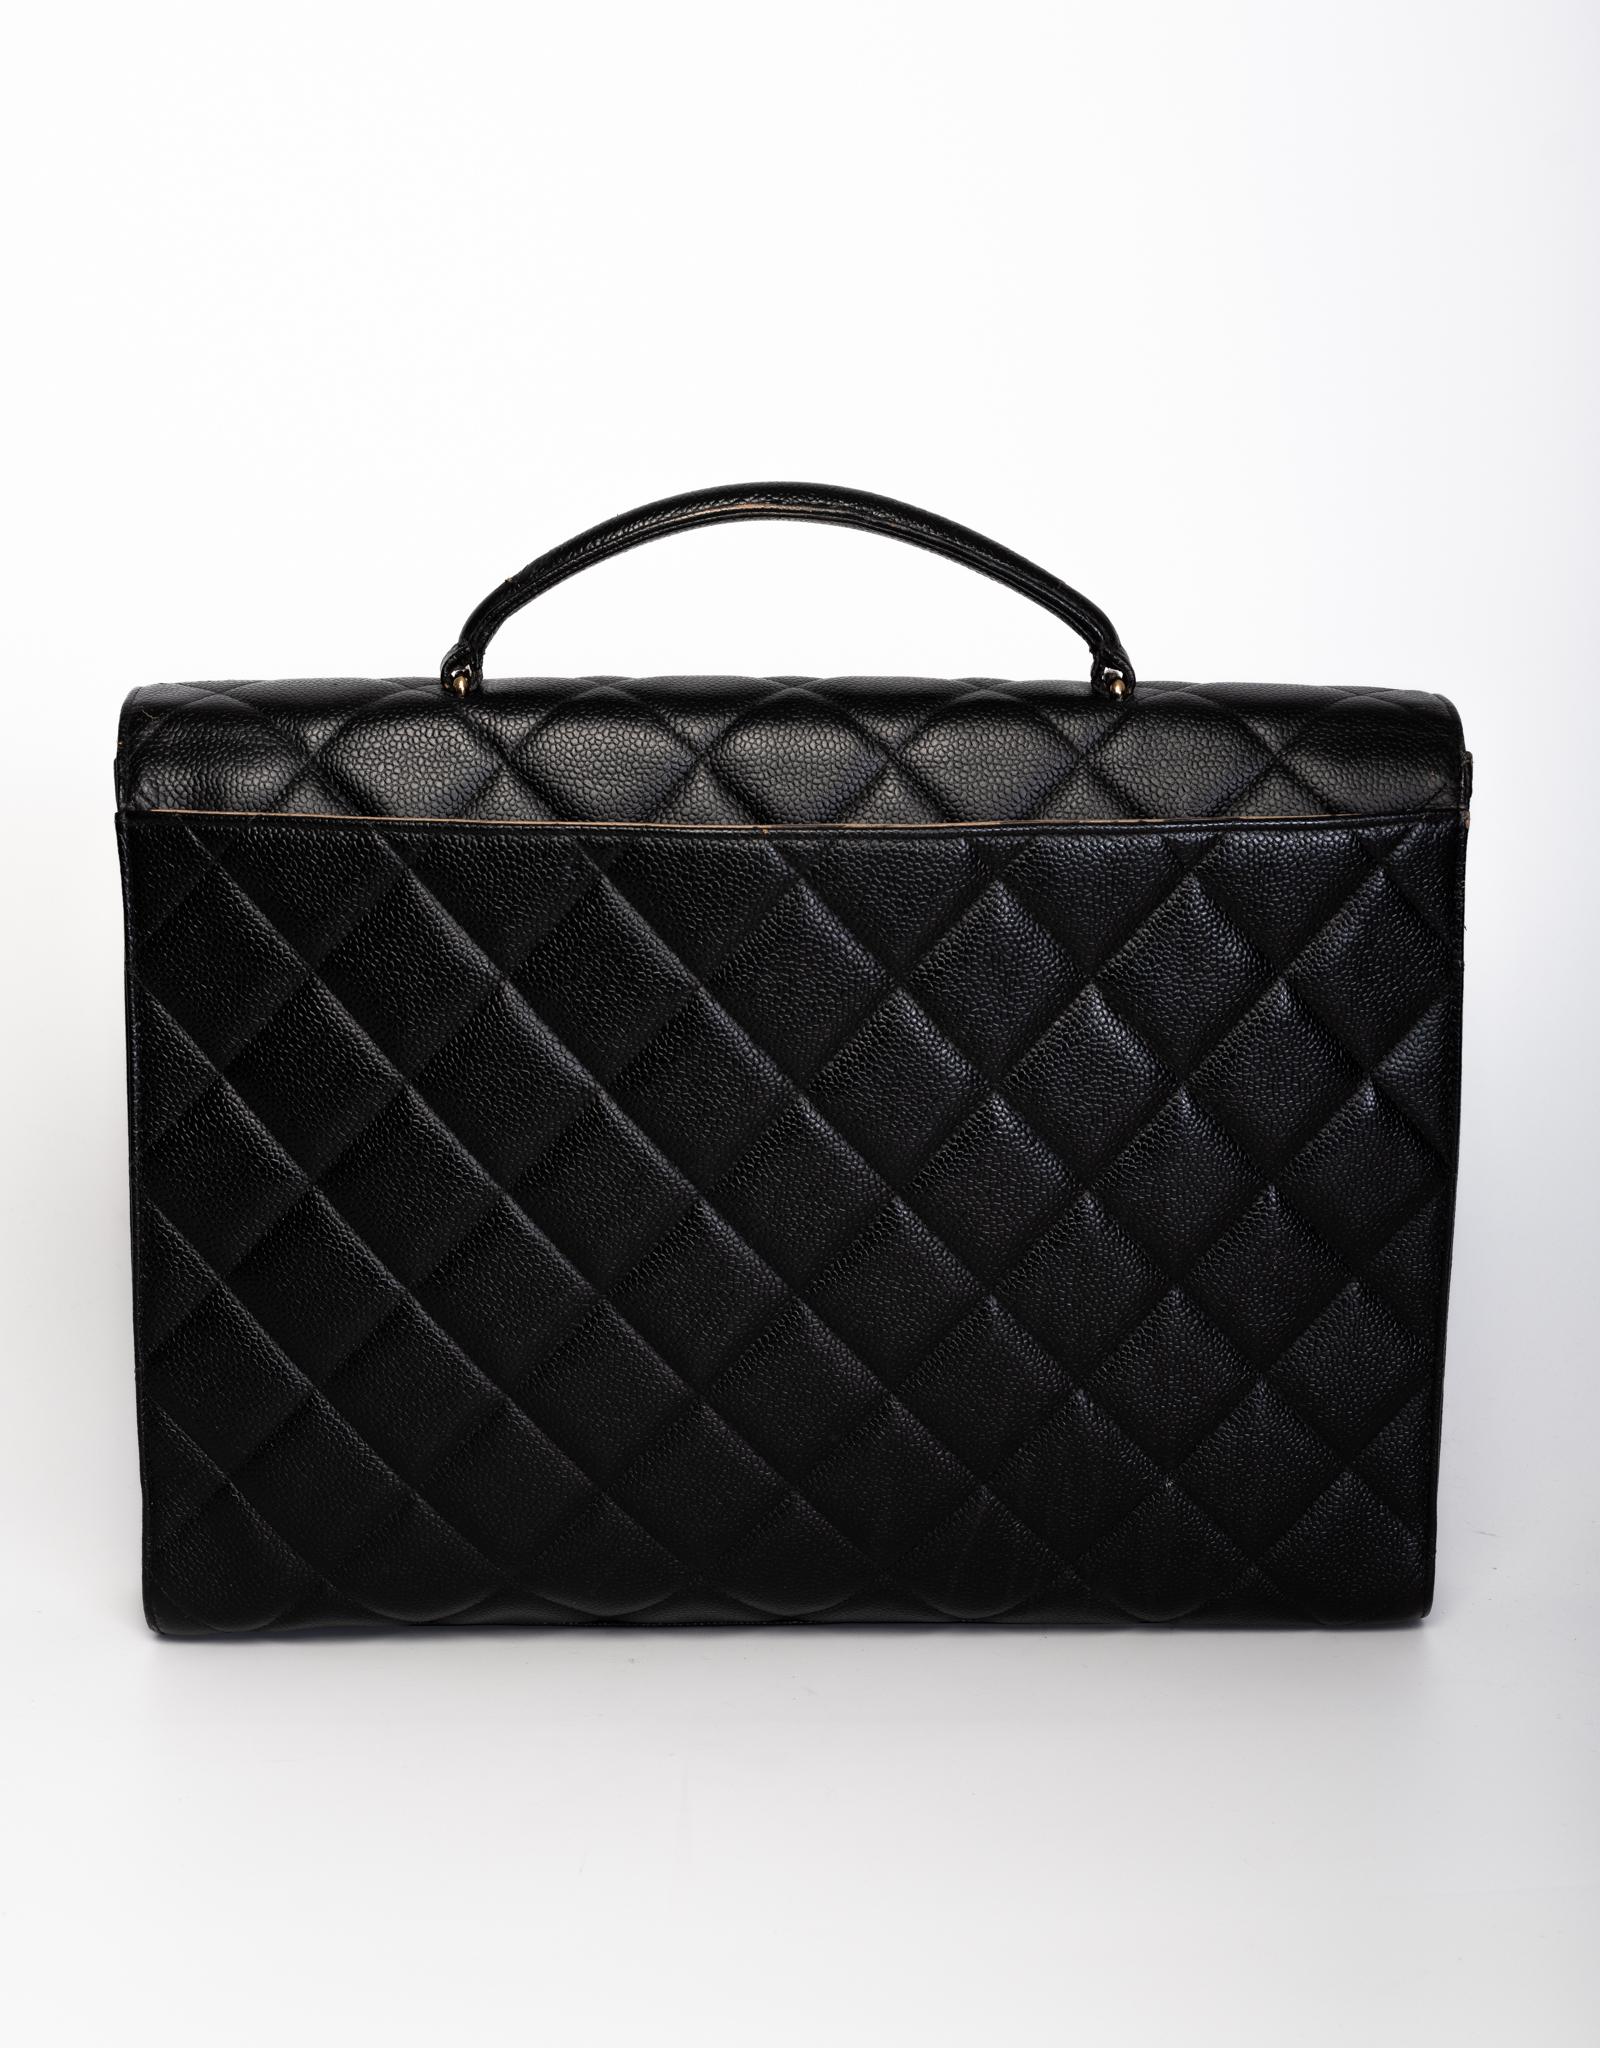 This Chanel briefcase bag is made with black caviar leather with signature diamond quilted stitching. Featuring gold tone hardware, a front flap with the signature interlocking CC turn lock closure, a sturdy top handle, a back full length slip